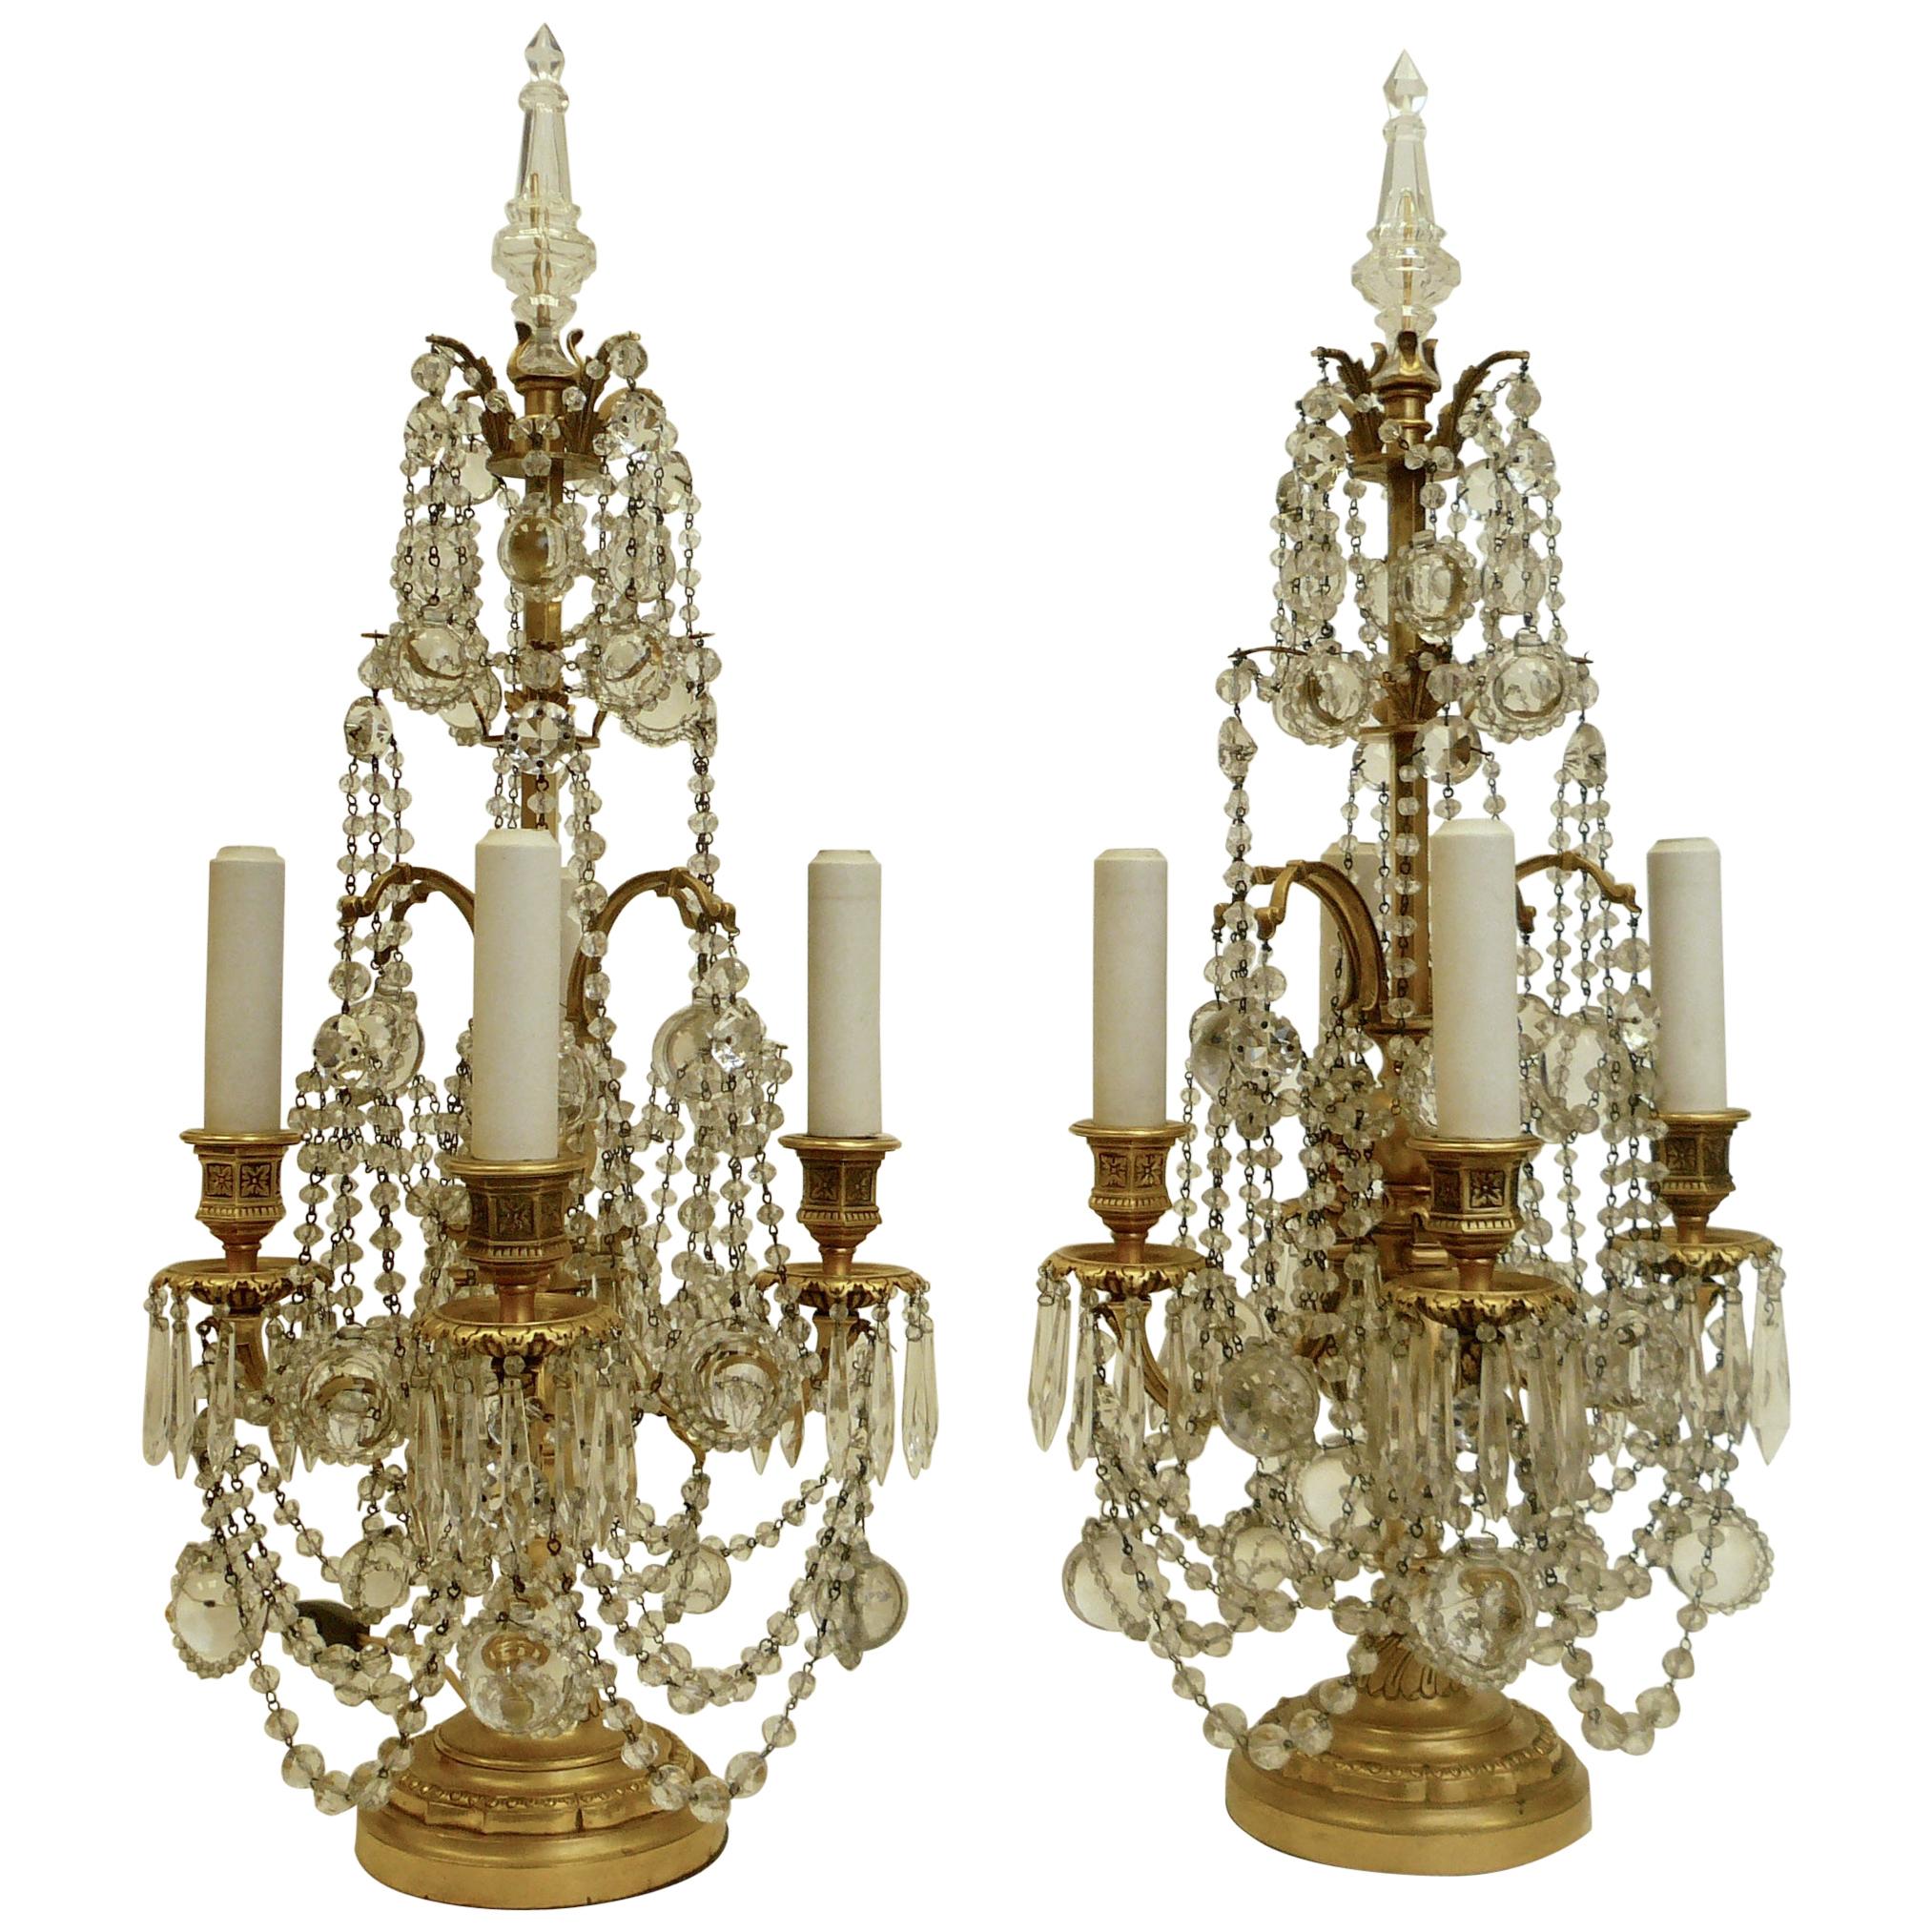 Pair Gilt Bronze and Crystal Girandole or Candelabra Lamps by E. F. Caldwell